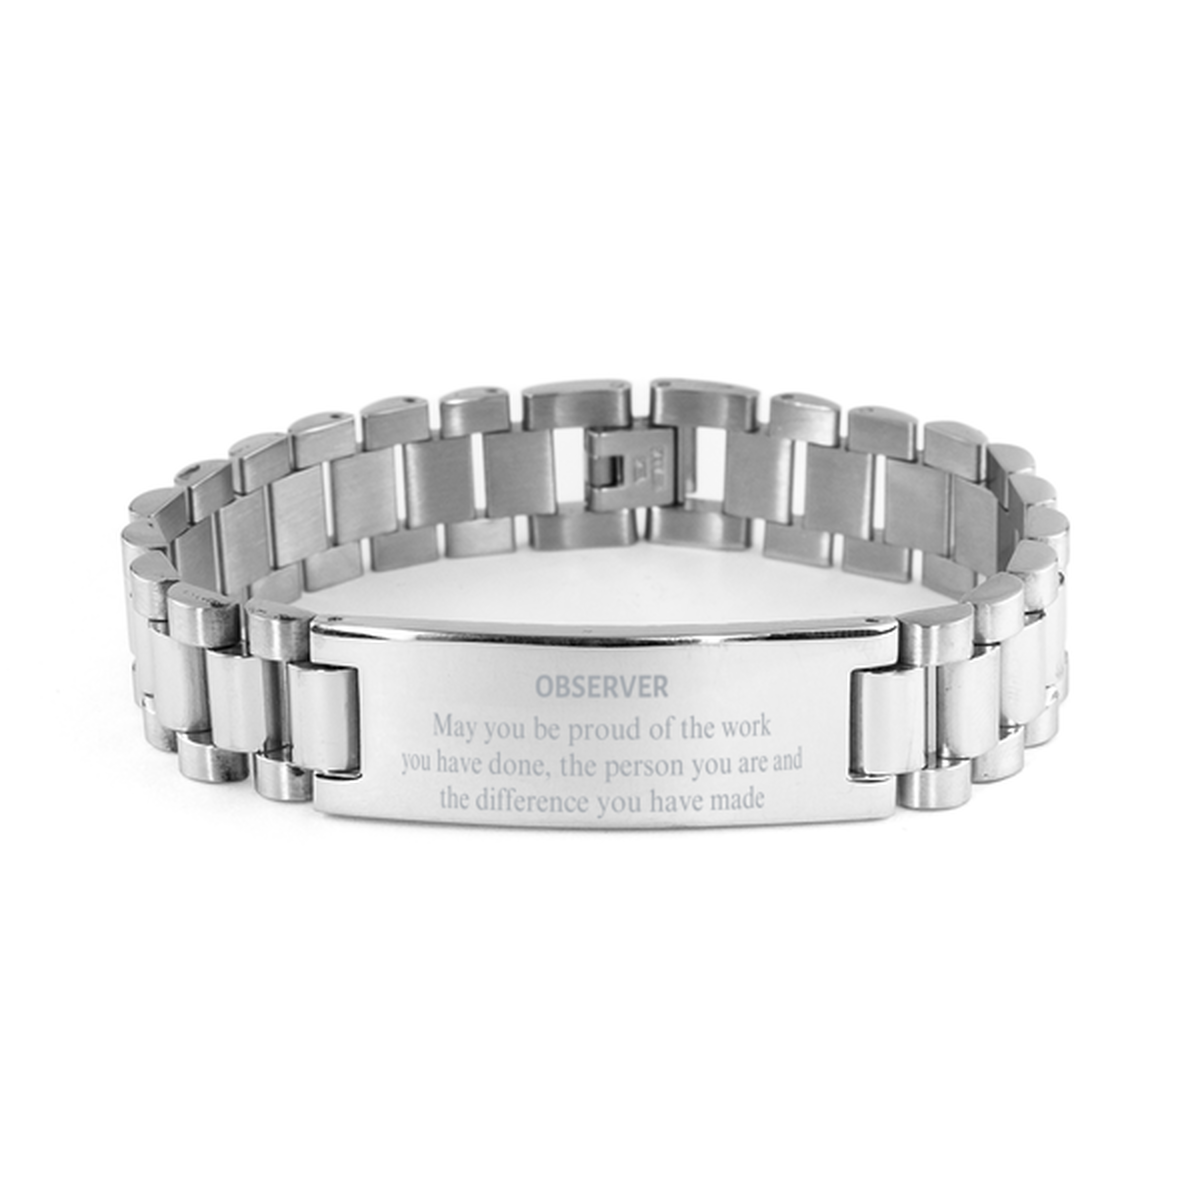 Observer May you be proud of the work you have done, Retirement Observer Ladder Stainless Steel Bracelet for Colleague Appreciation Gifts Amazing for Observer